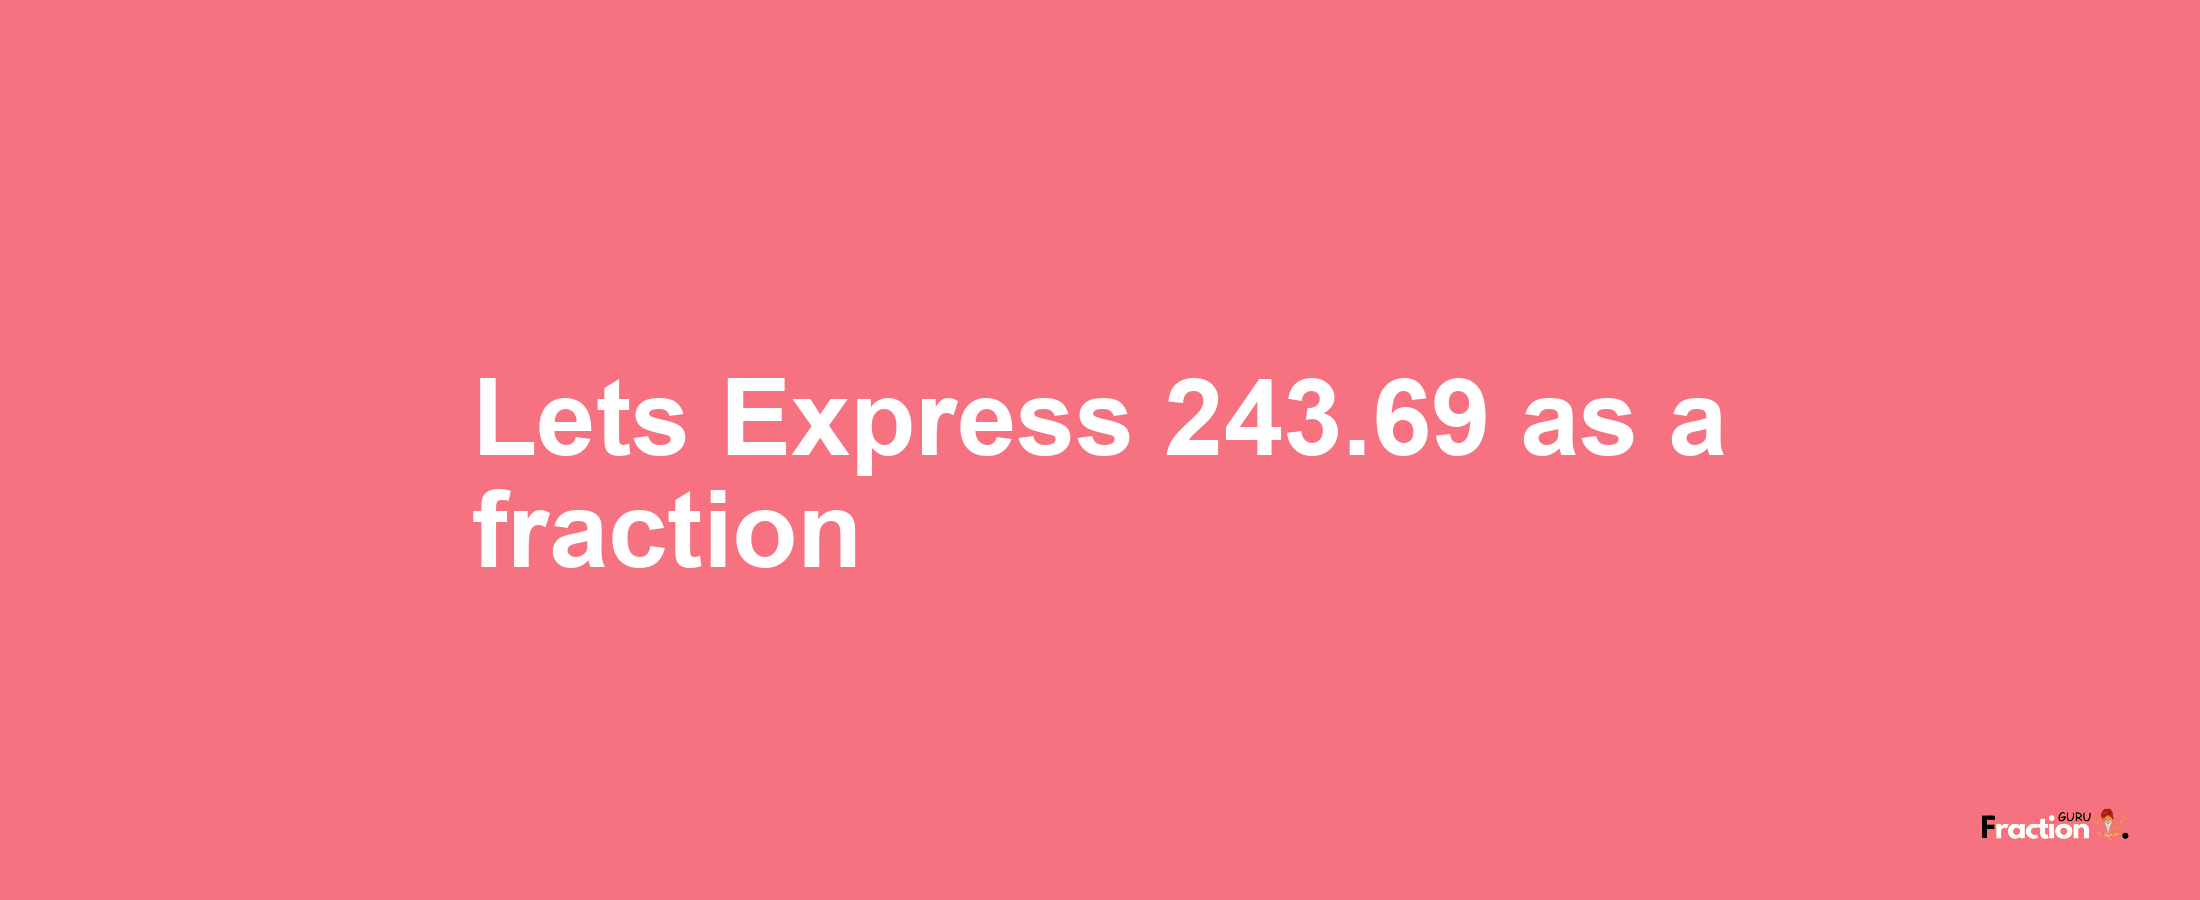 Lets Express 243.69 as afraction